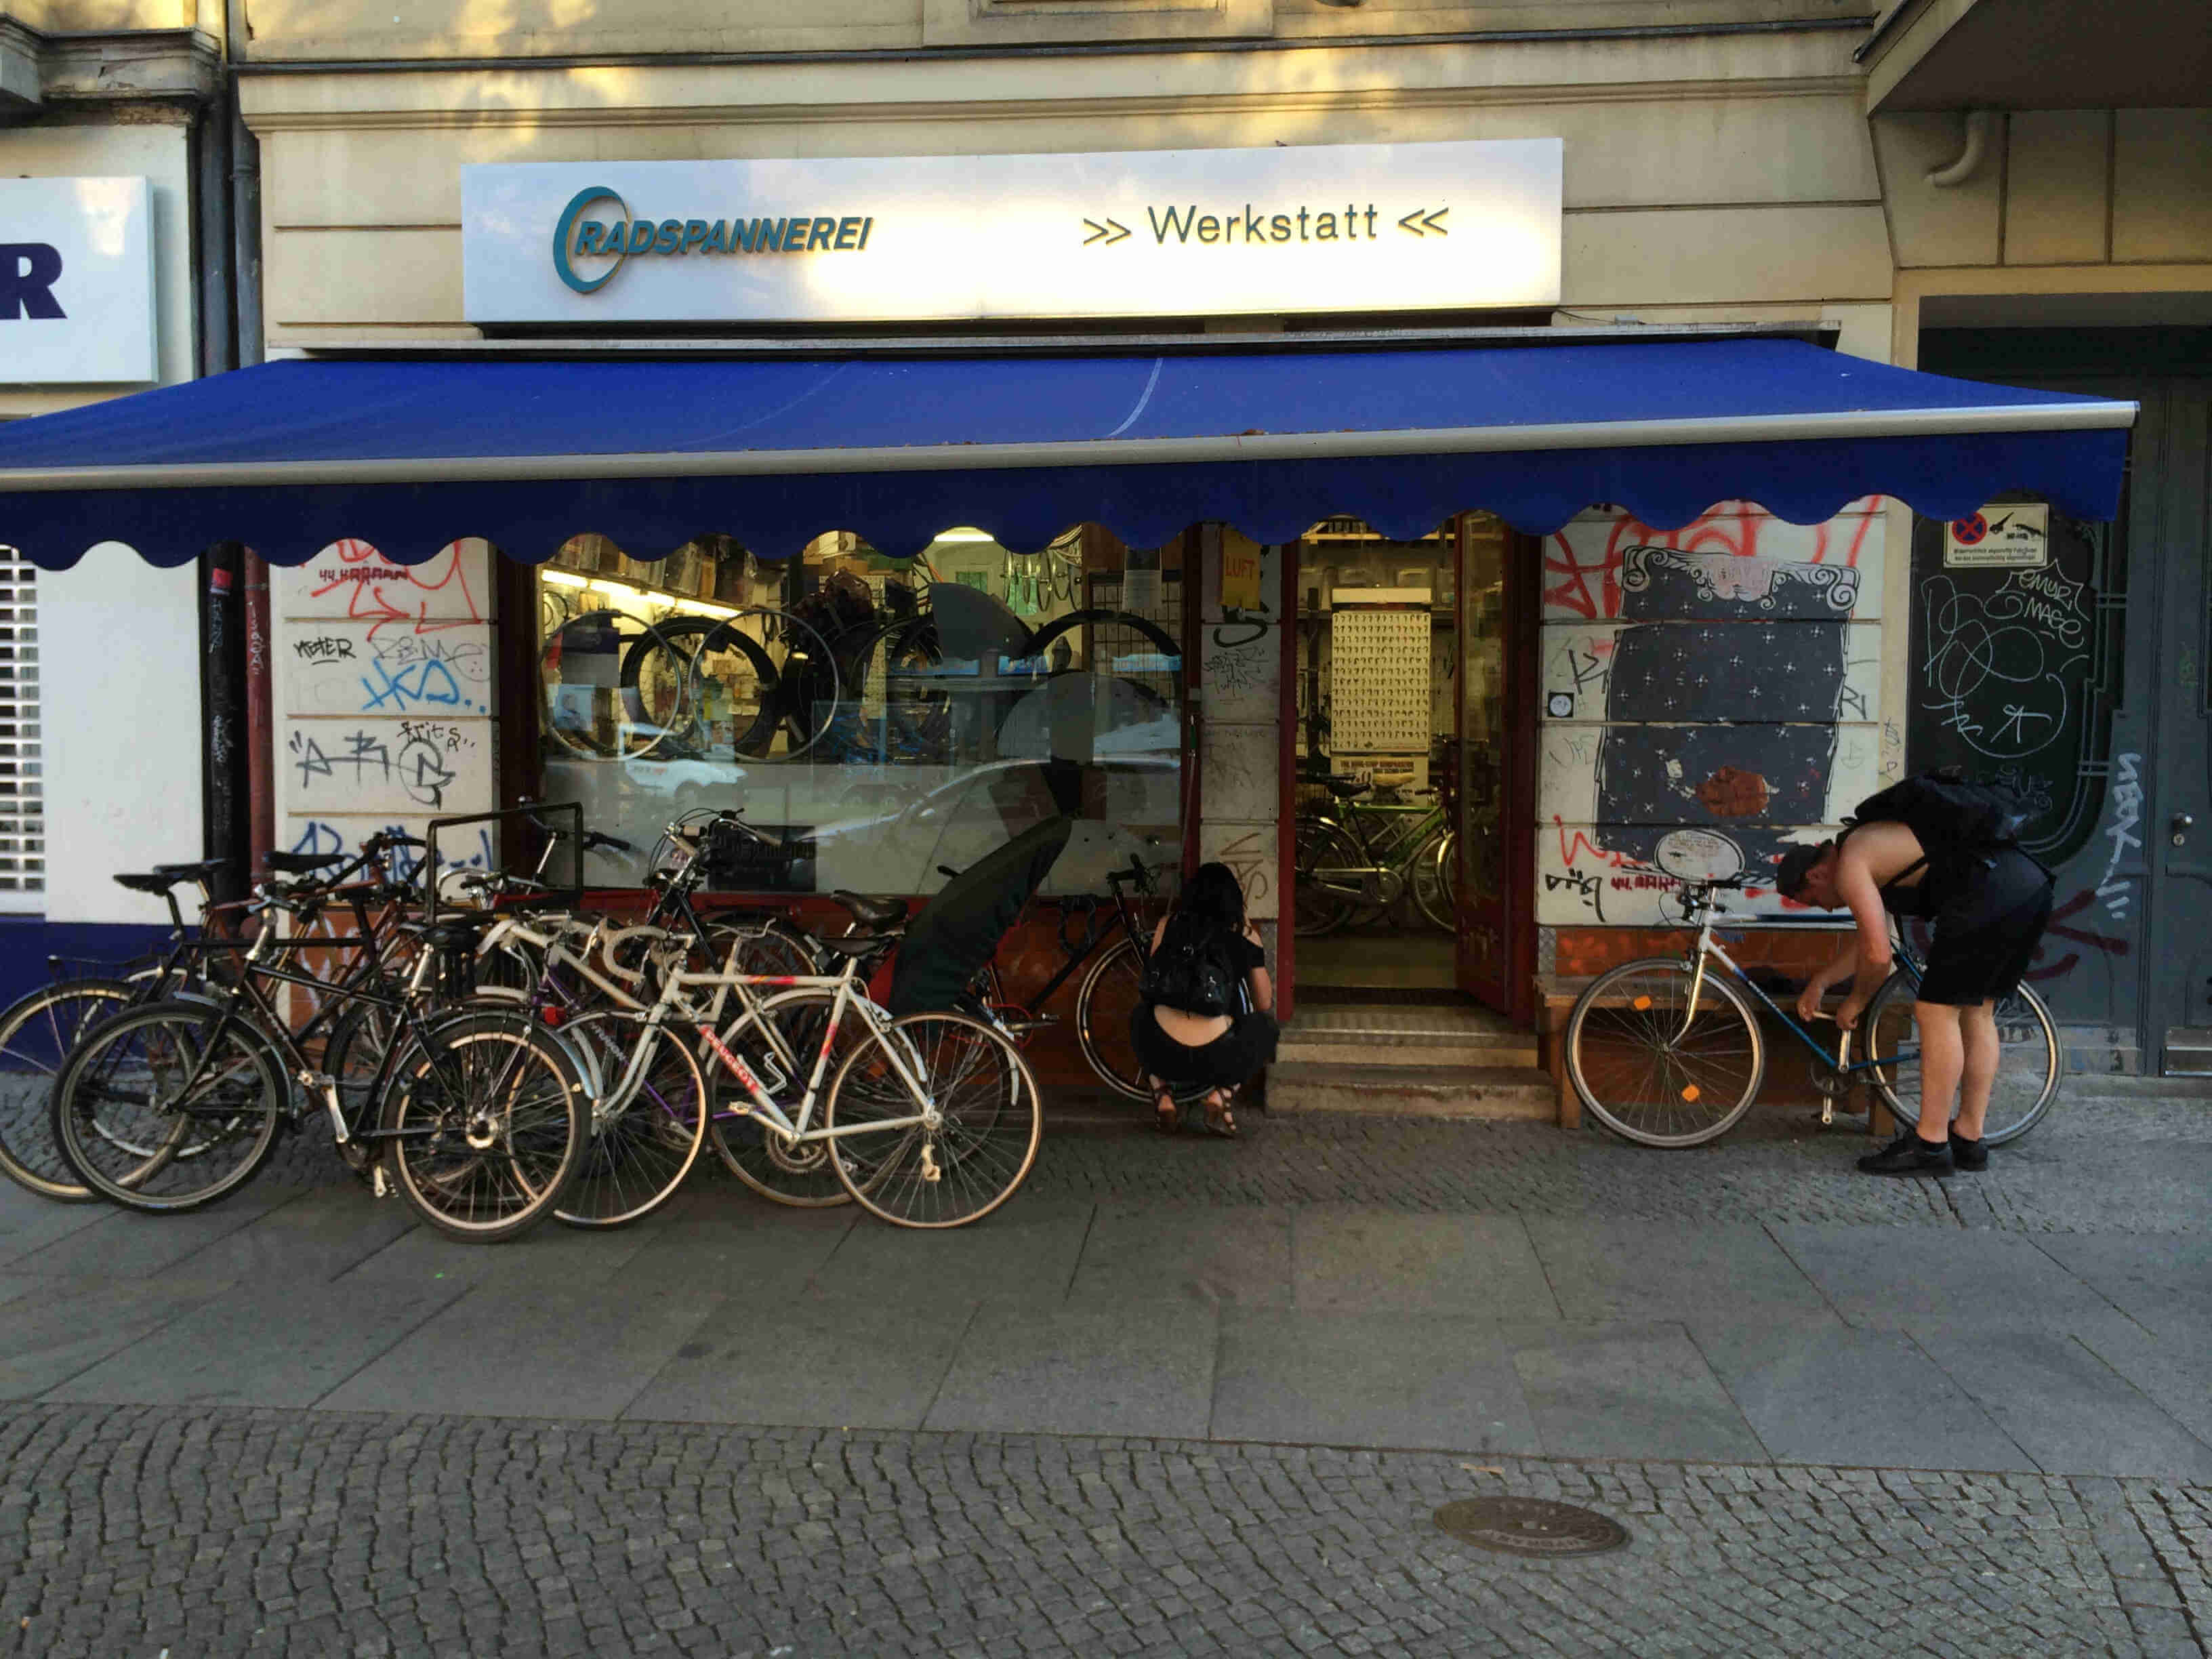 Front view of a group of bikes, parked side by side on a brick sidewalk, in front of the Radspannerei bike shop